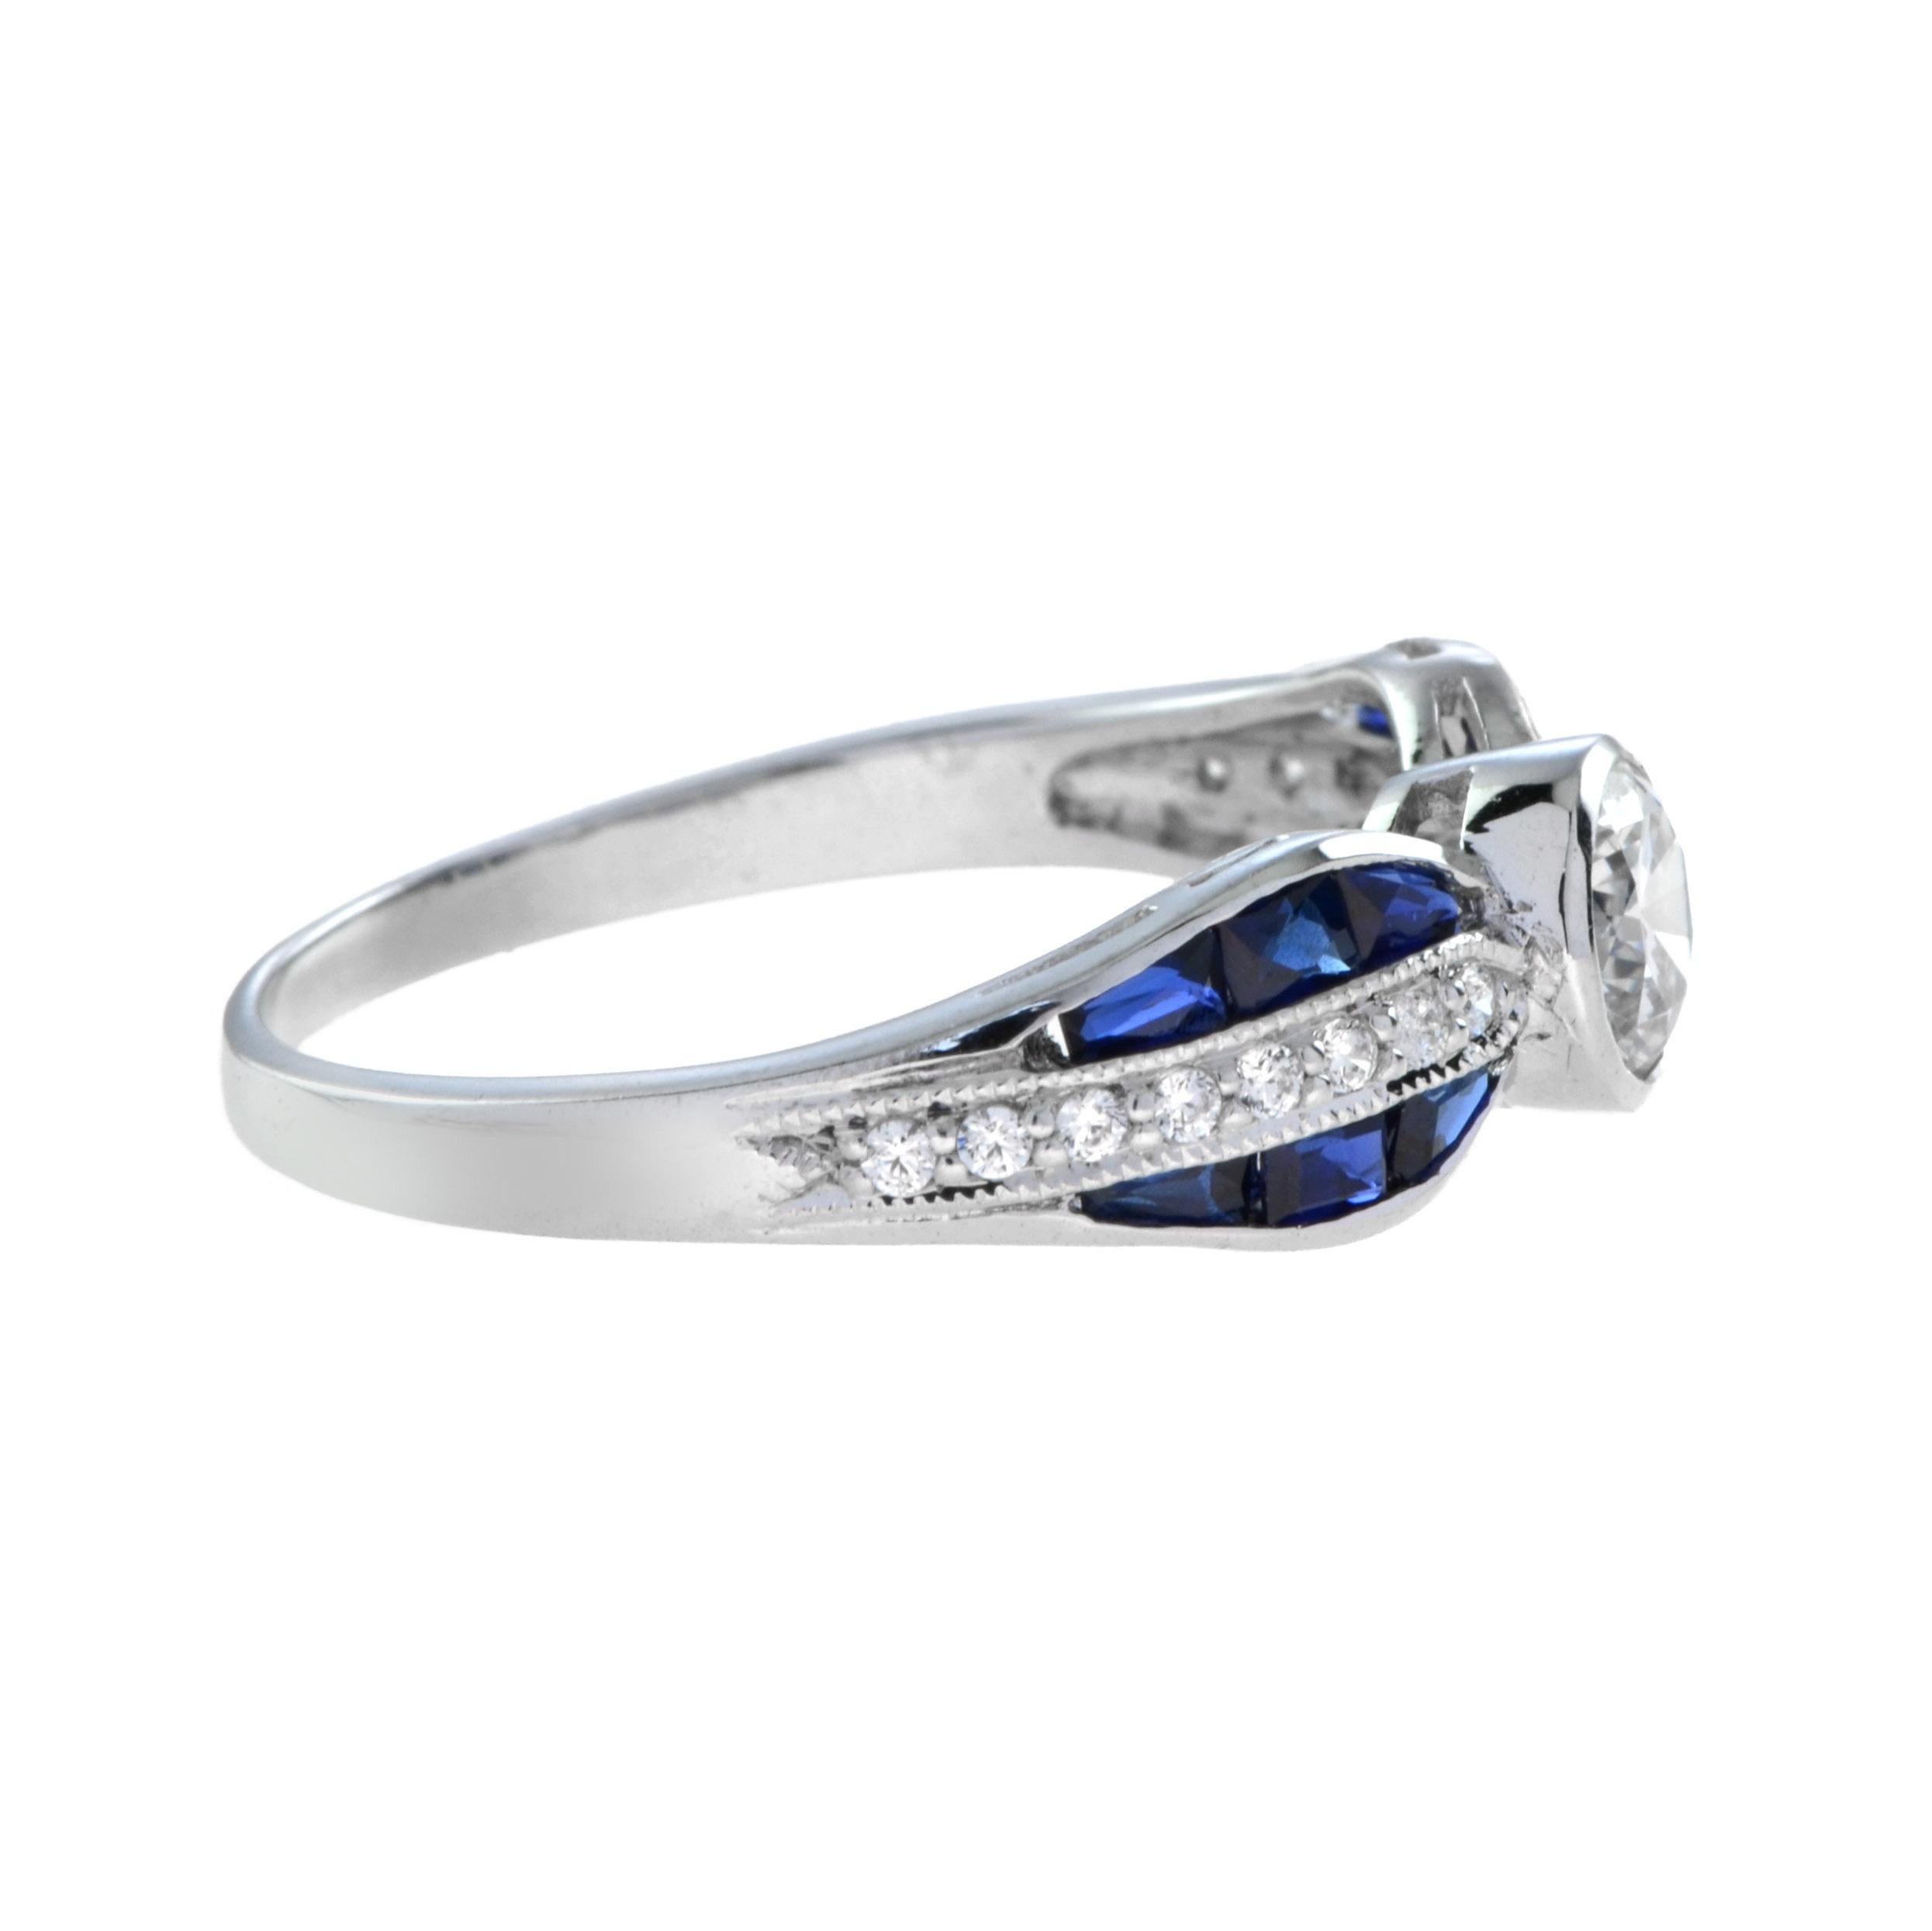 For Sale:  Diamond and Sapphire Art Deco Style Solitaire Ring in 18K White Gold 4